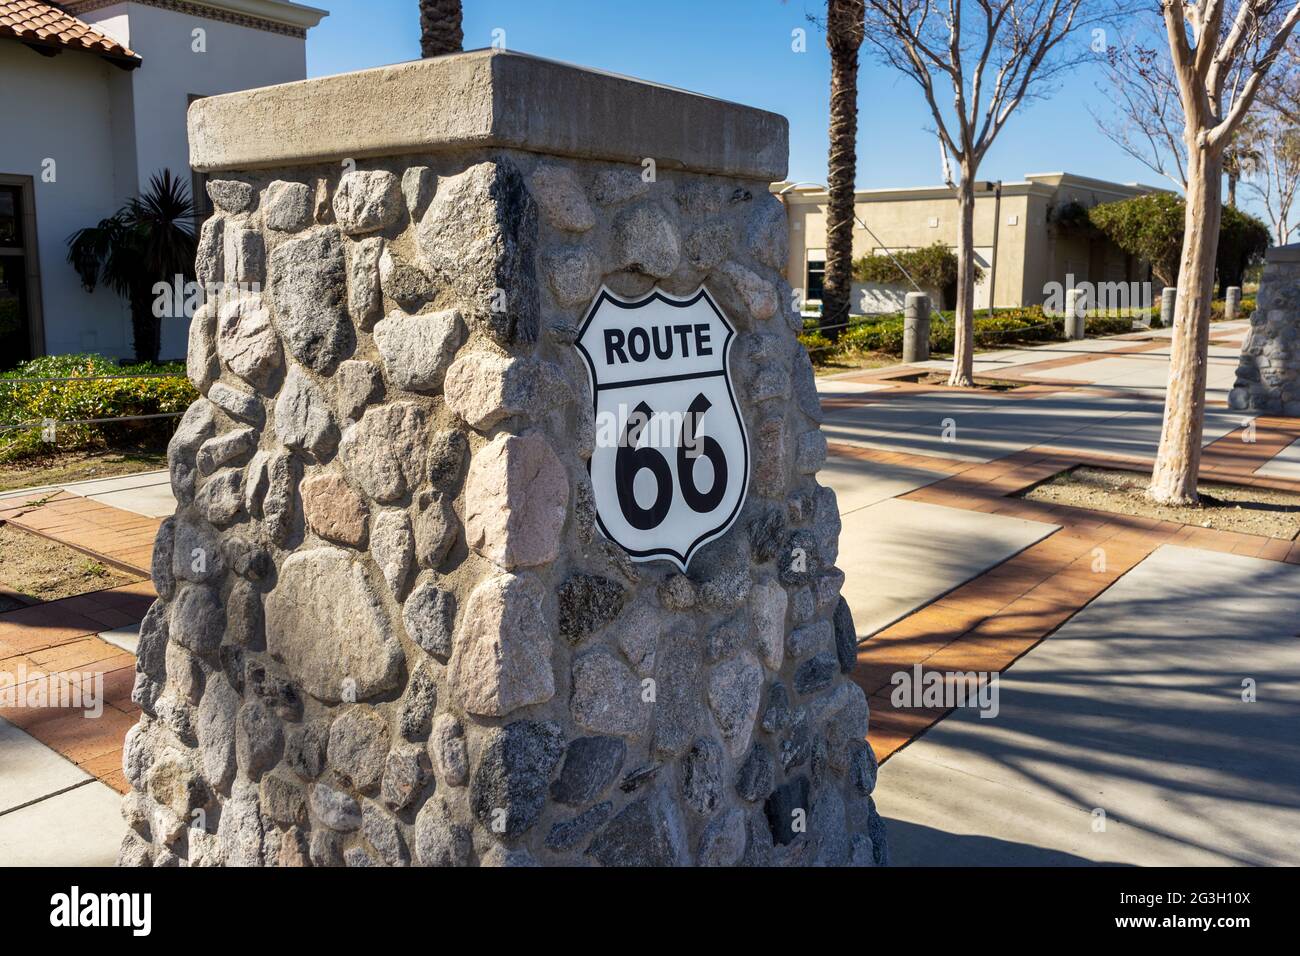 Rancho Cucamonga, CA, USA – February 6, 2021: A Route 66 sign on Foothill Boulevard in Rancho Cucamonga, California. Stock Photo